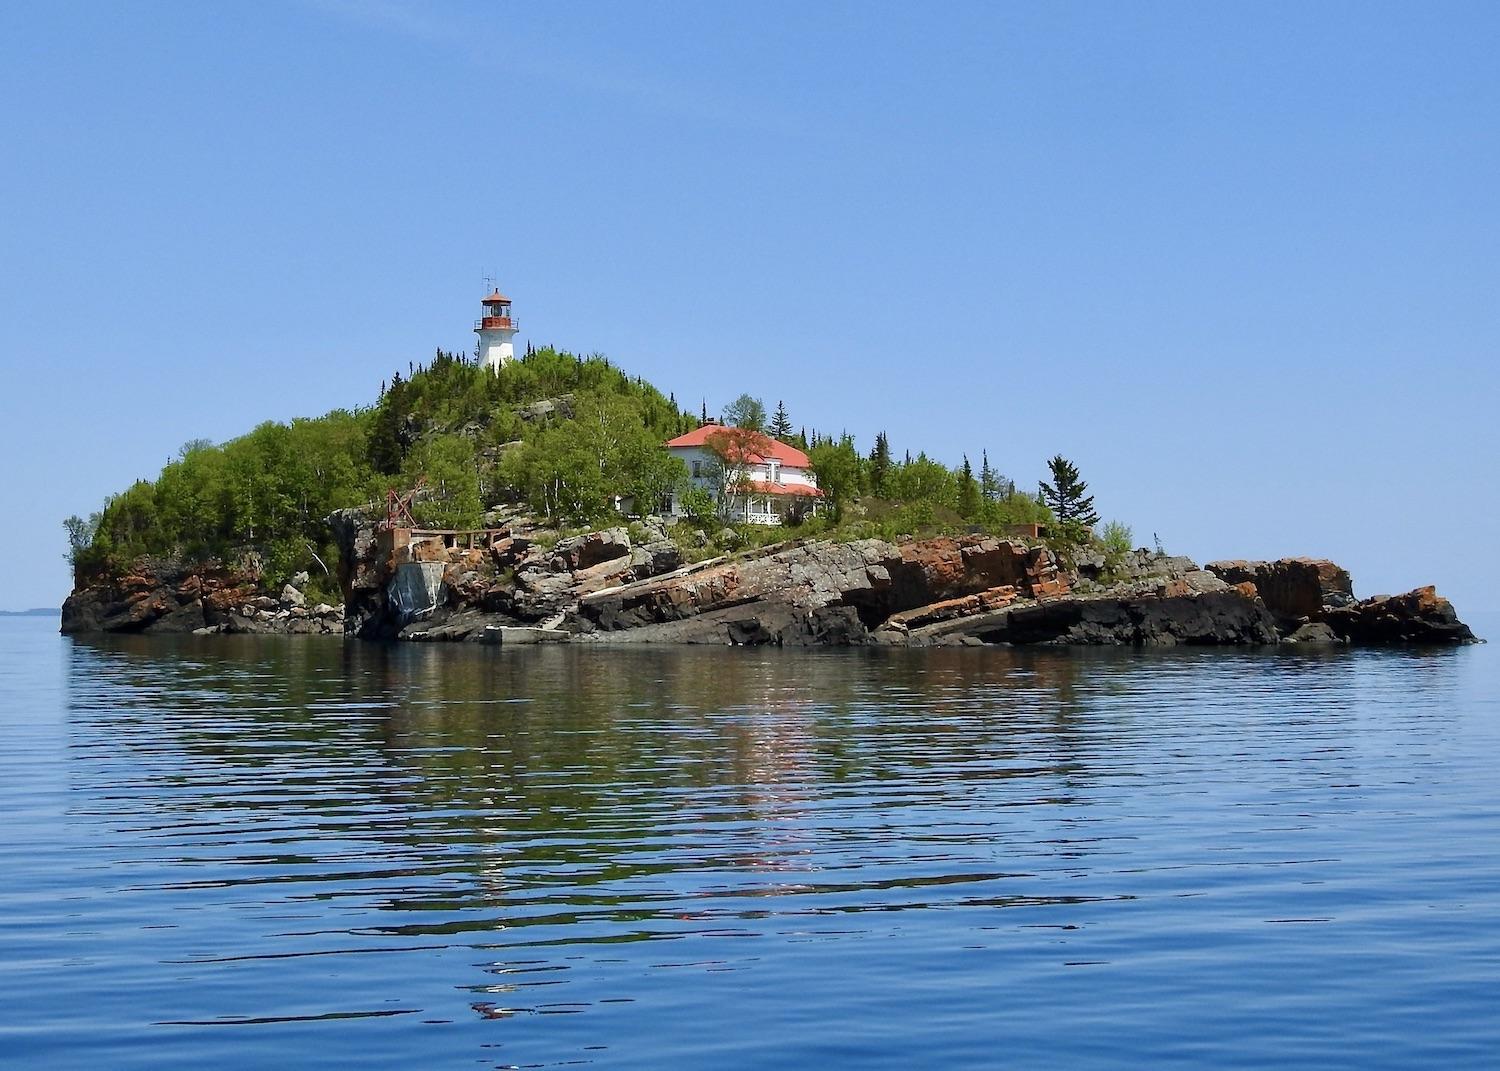 A view of Trowbridge Island Lighthouse in Lake Superior.